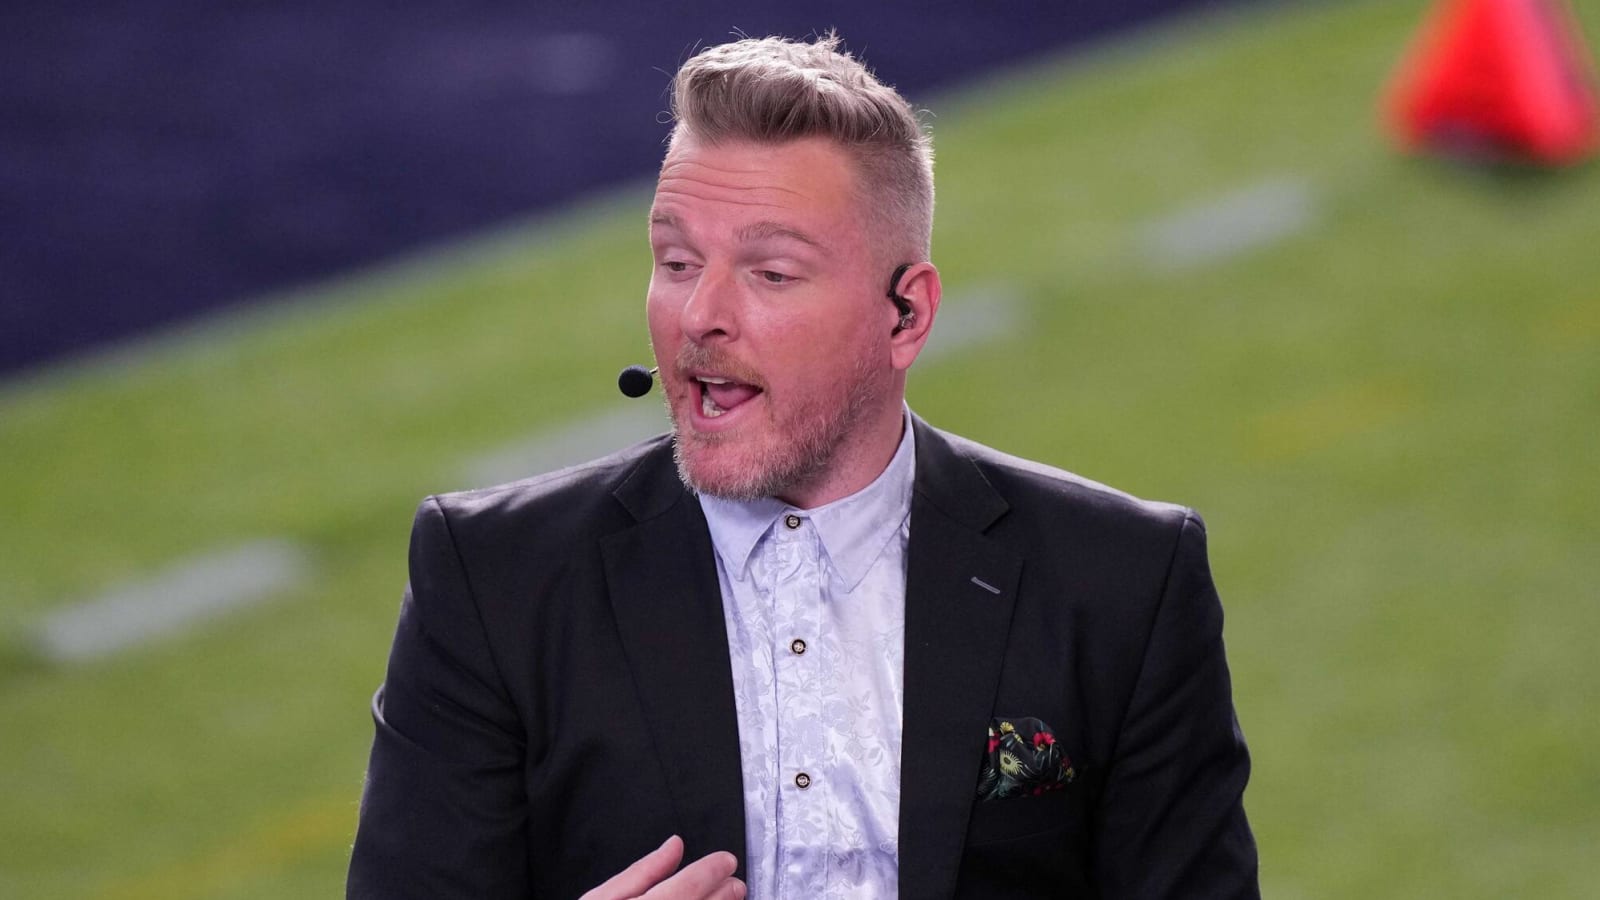 Pat McAfee had Nick Saban, Lee Corso in stitches during pregame show